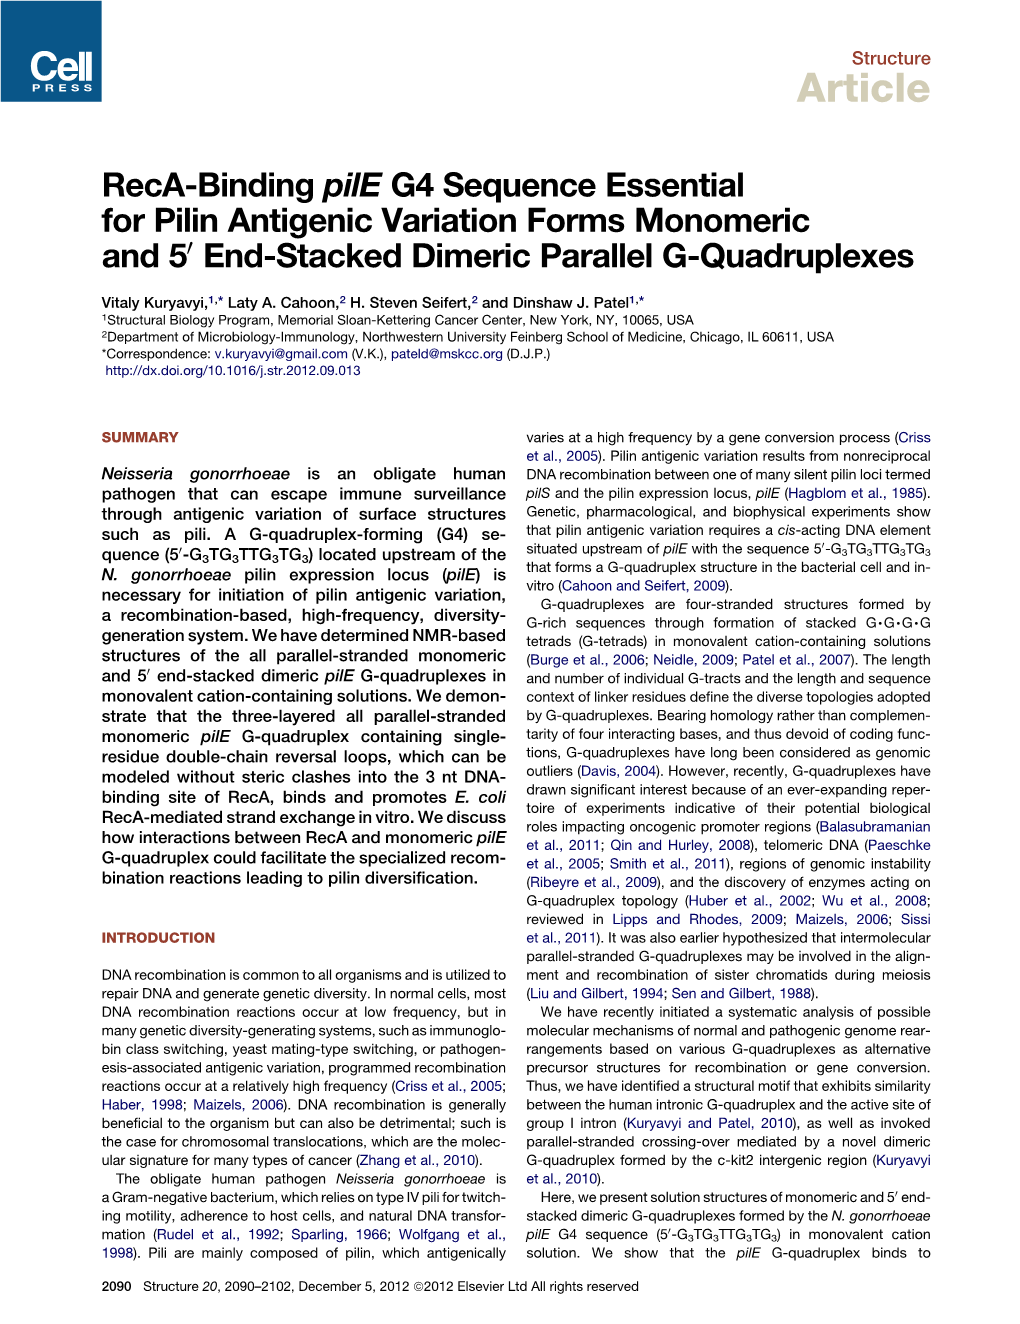 Reca-Binding Pile G4 Sequence Essential for Pilin Antigenic Variation Forms Monomeric and 5&Prime